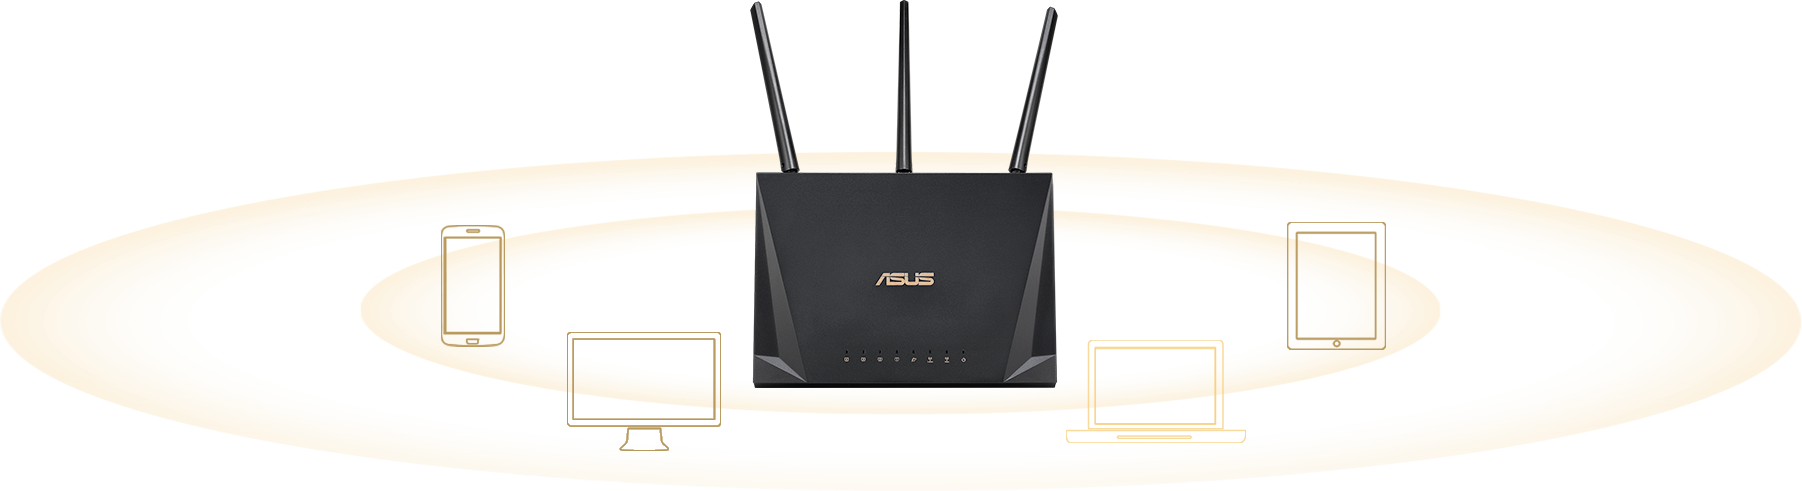 ASUS RT-AC65P comes with Multi-user MIMO, allowing RT-AC65P to serve multi-device at a time